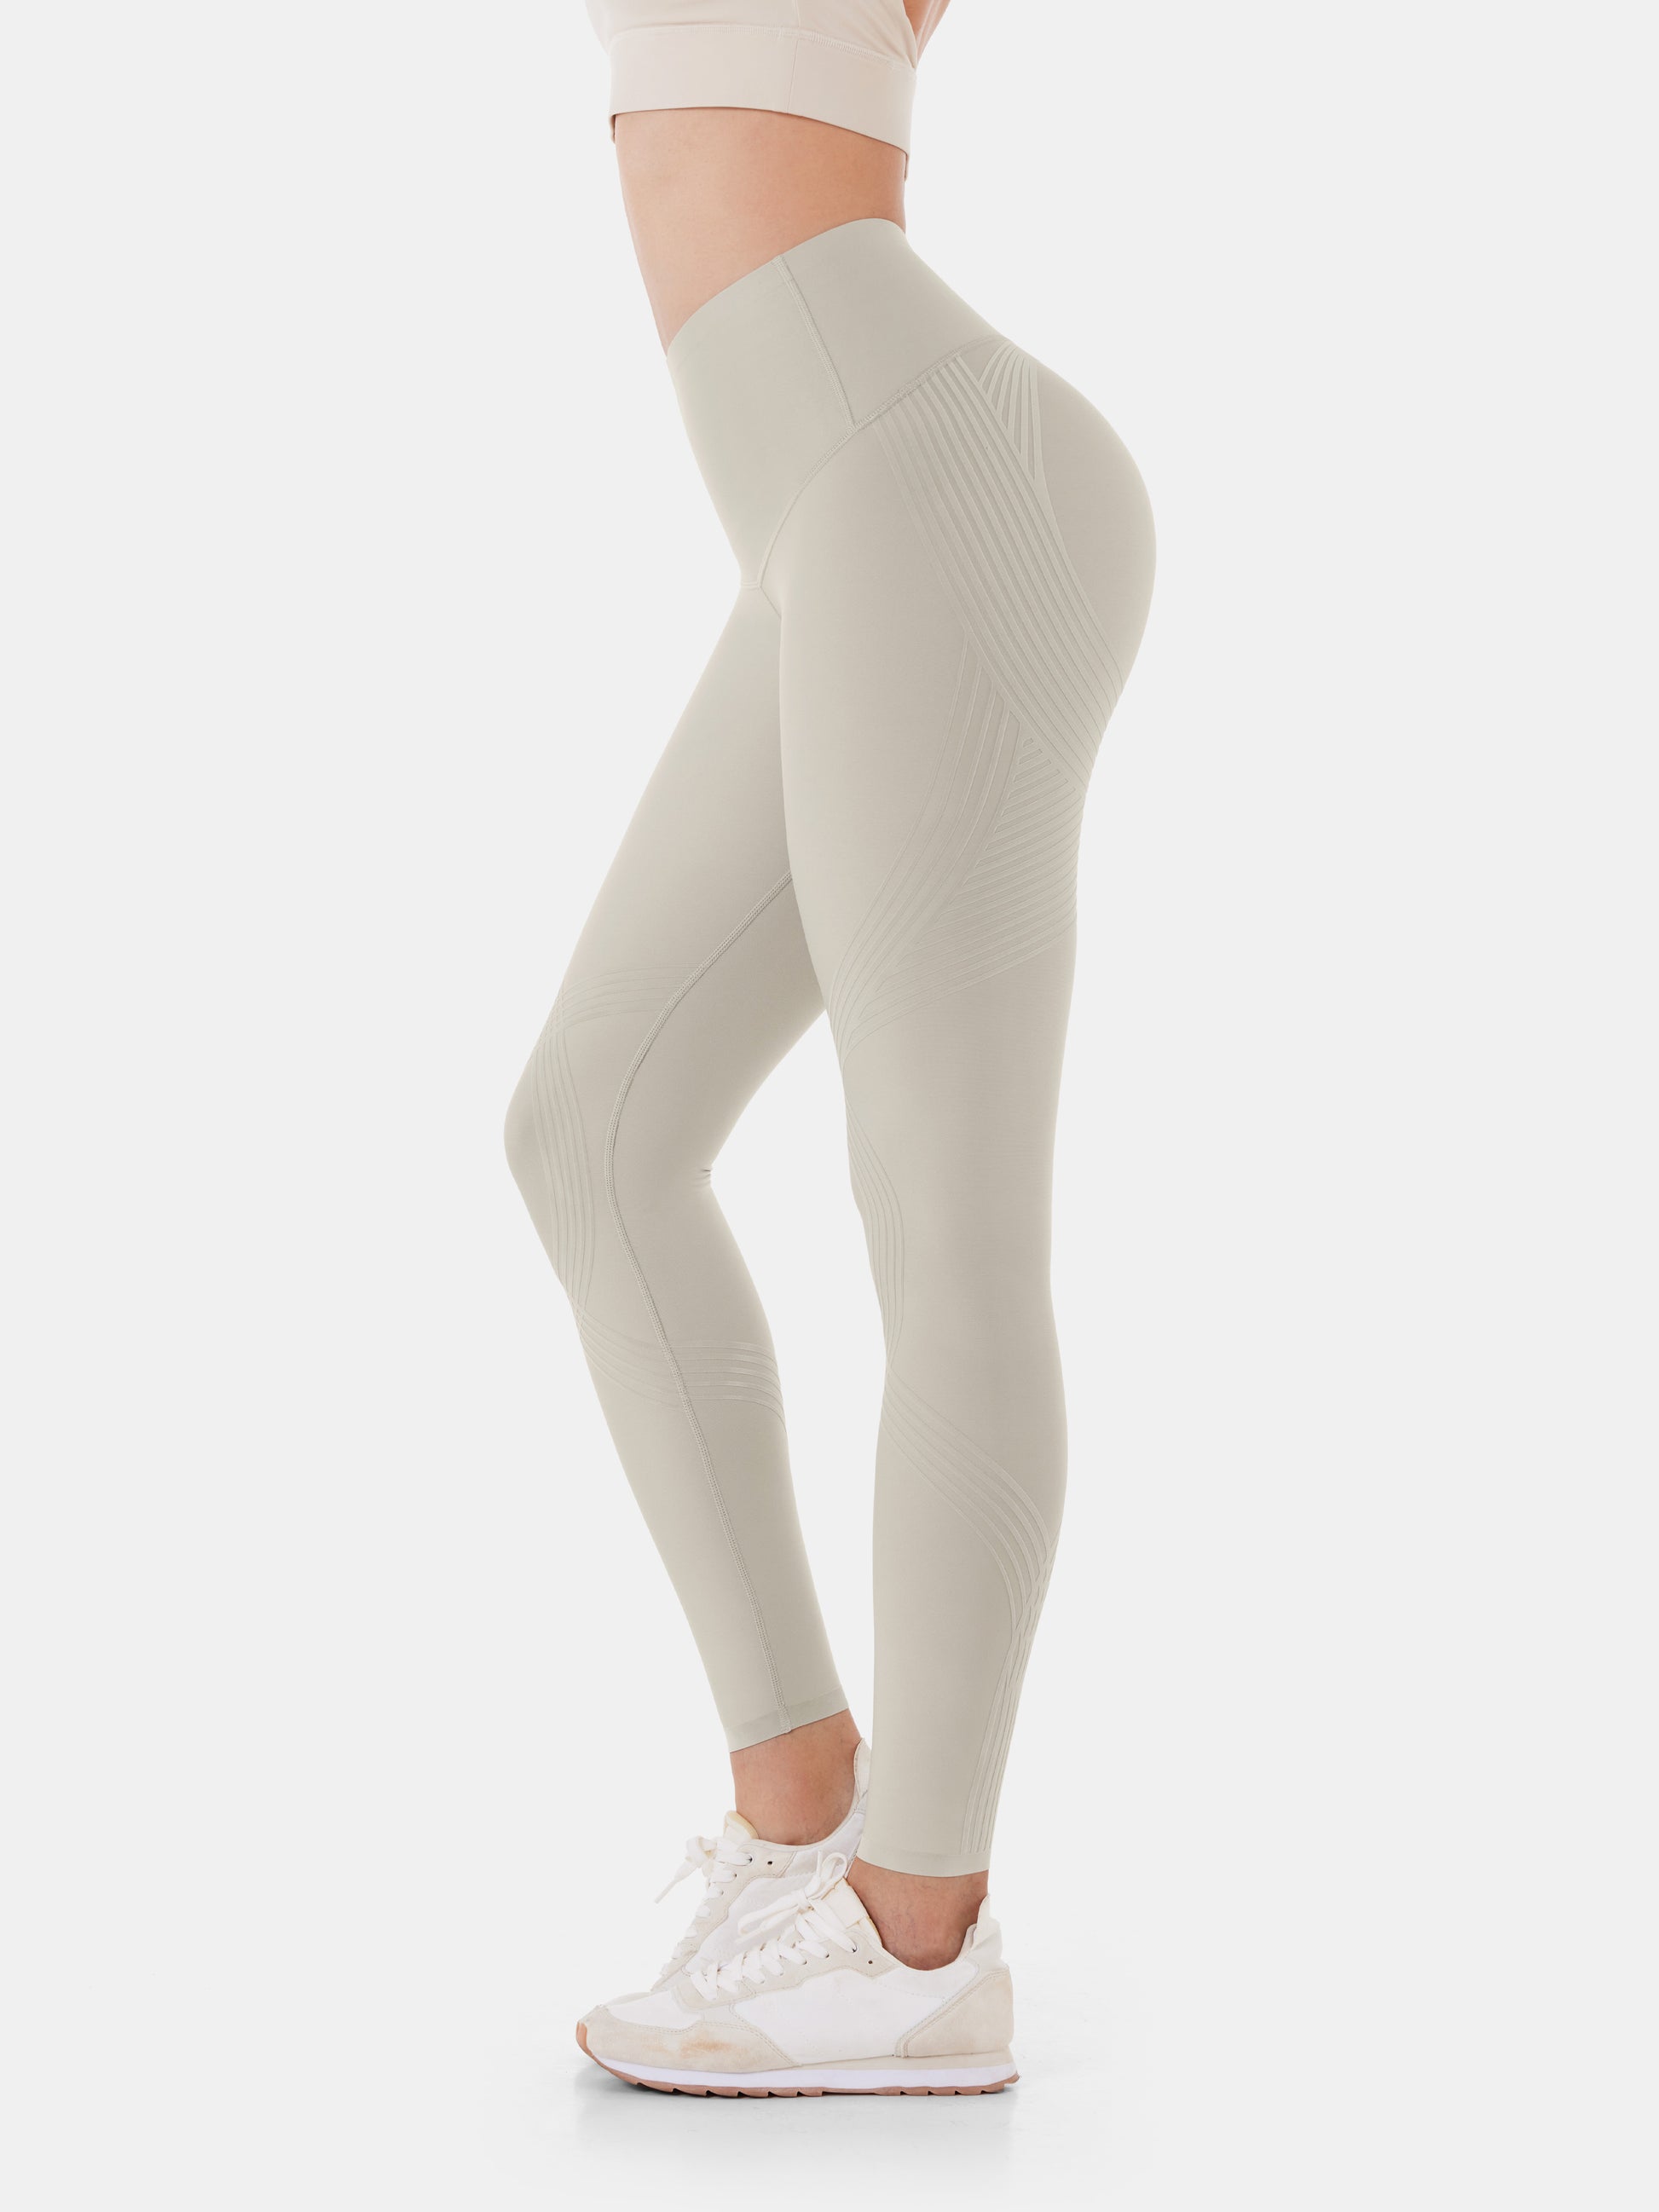 Best Compression Leggings to Smooth Cellulite – Fanka